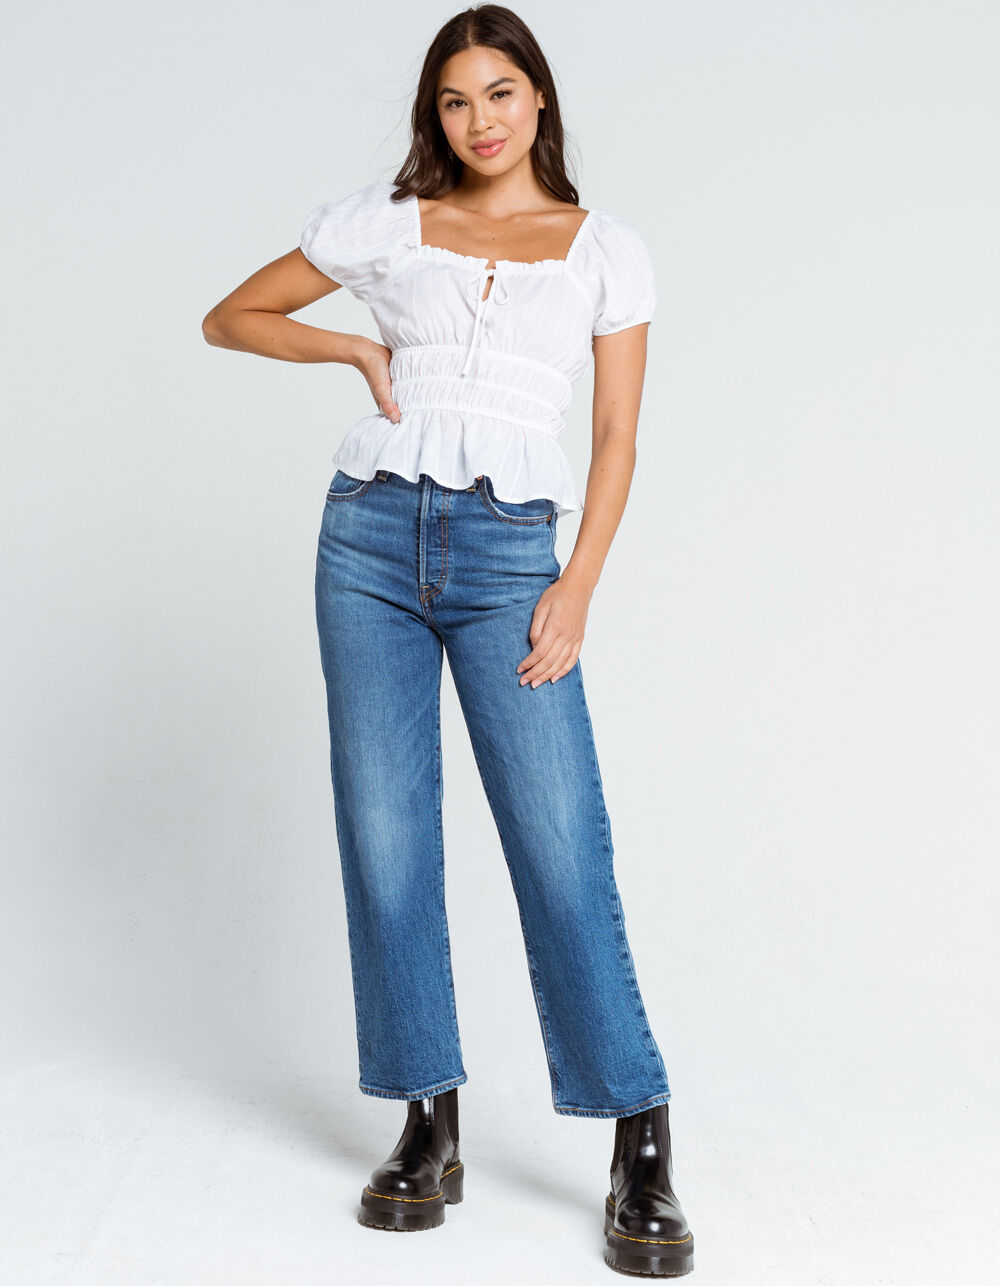 WEST OF MELROSE Puff Stuff Tie Front Womens Top - WHITE | Tillys